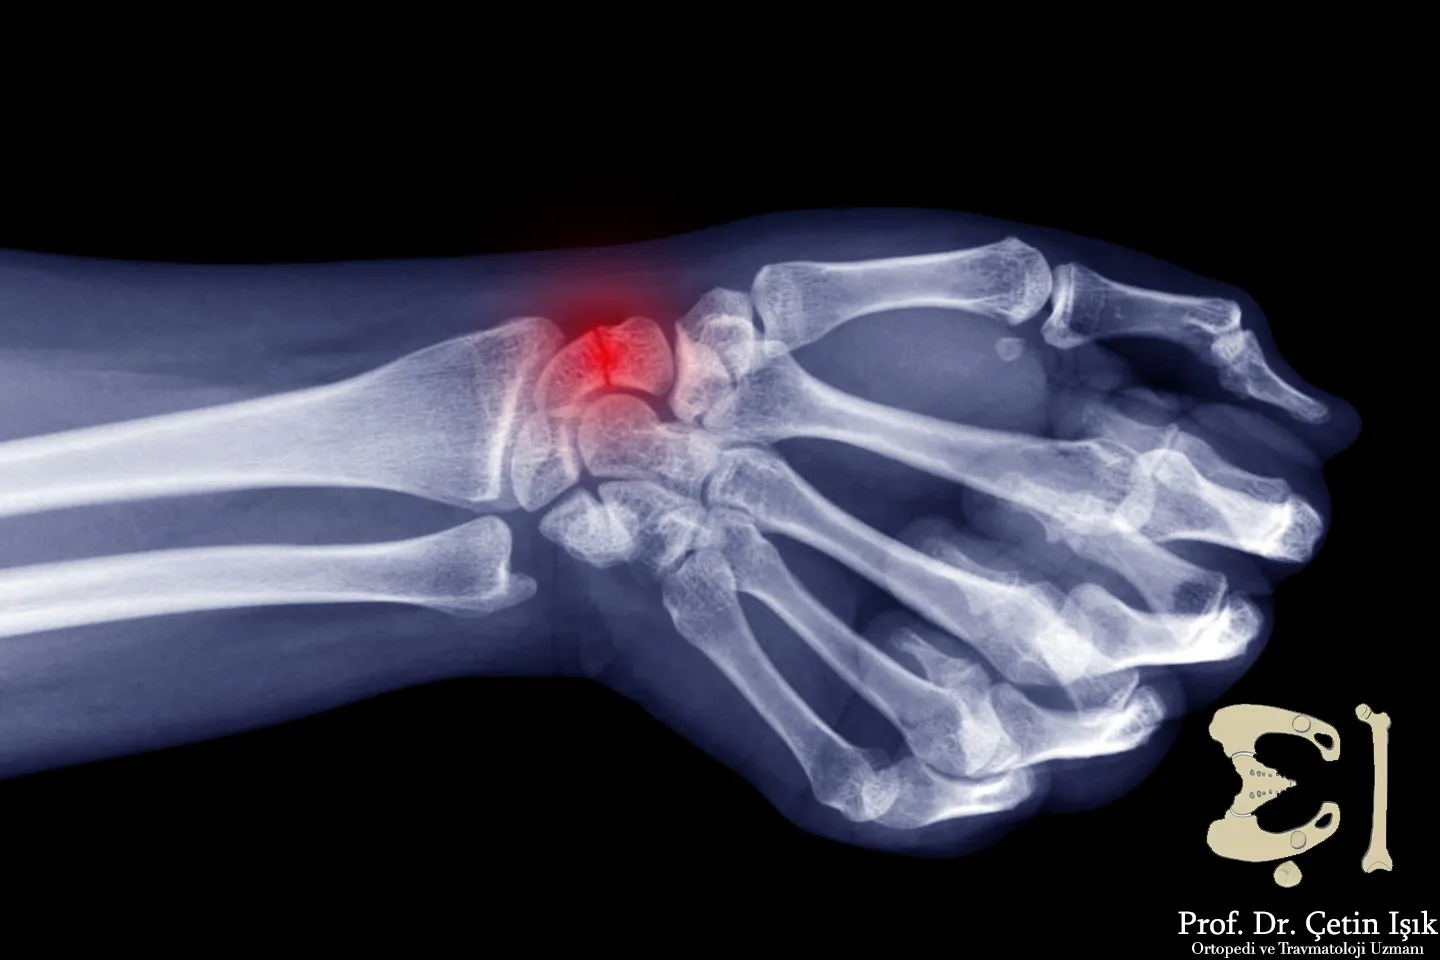 A radiograph of the hand, in which we note the presence of an unaltered fracture in the scaphoid bone inside the hand joint